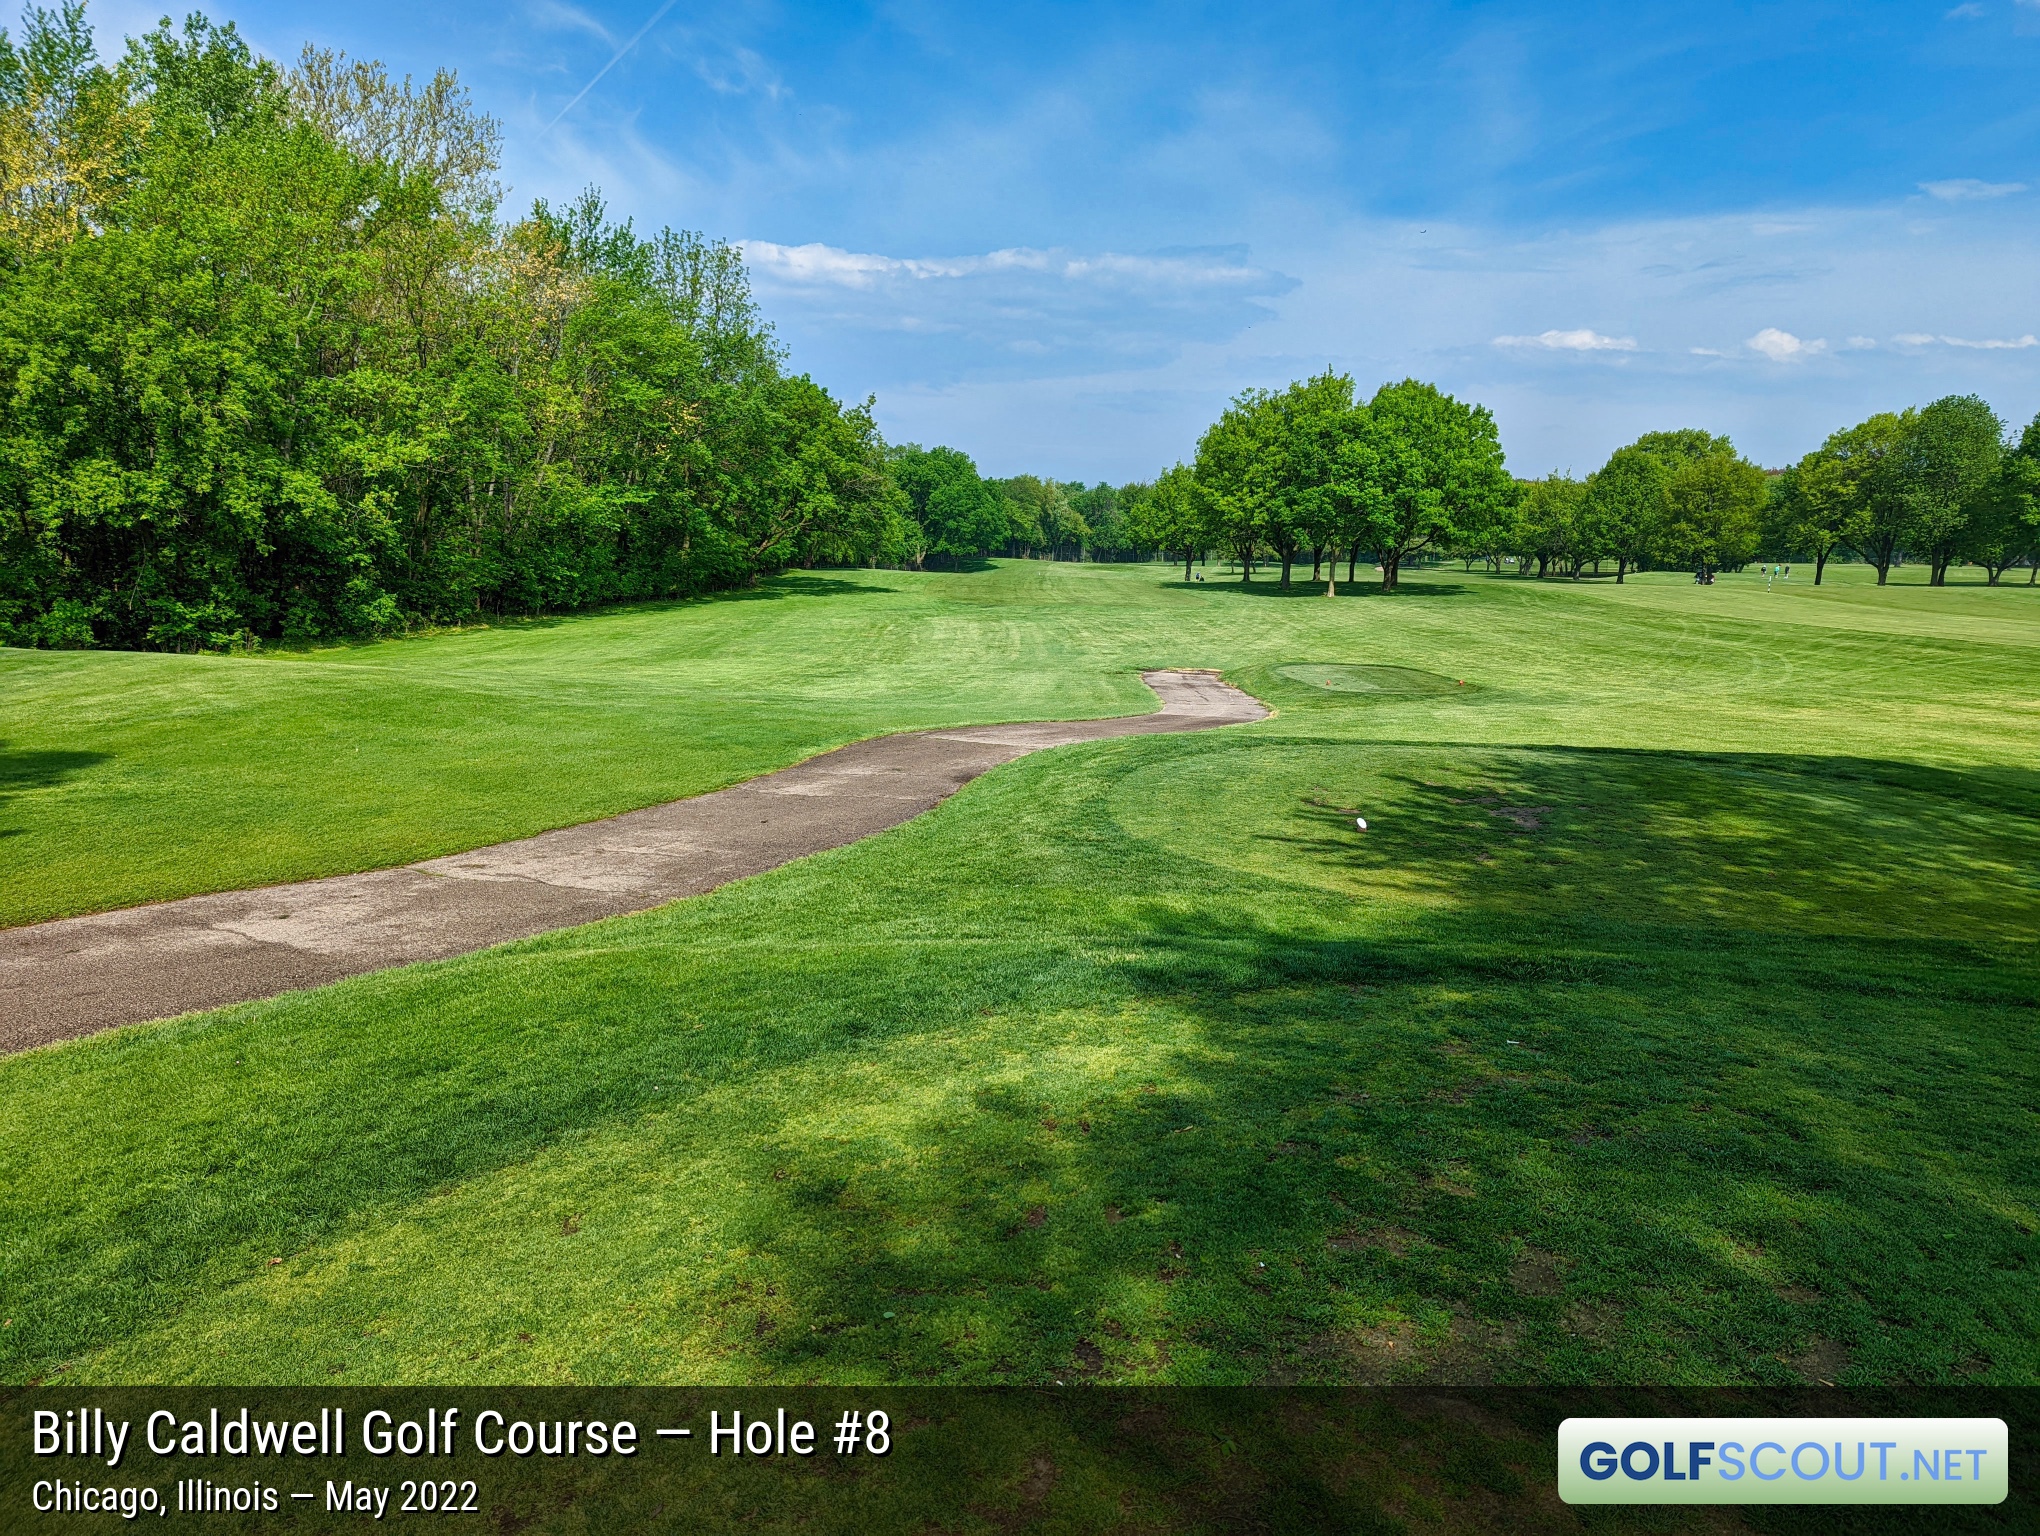 Photo of hole #8 at Billy Caldwell Golf Course in Chicago, Illinois. 